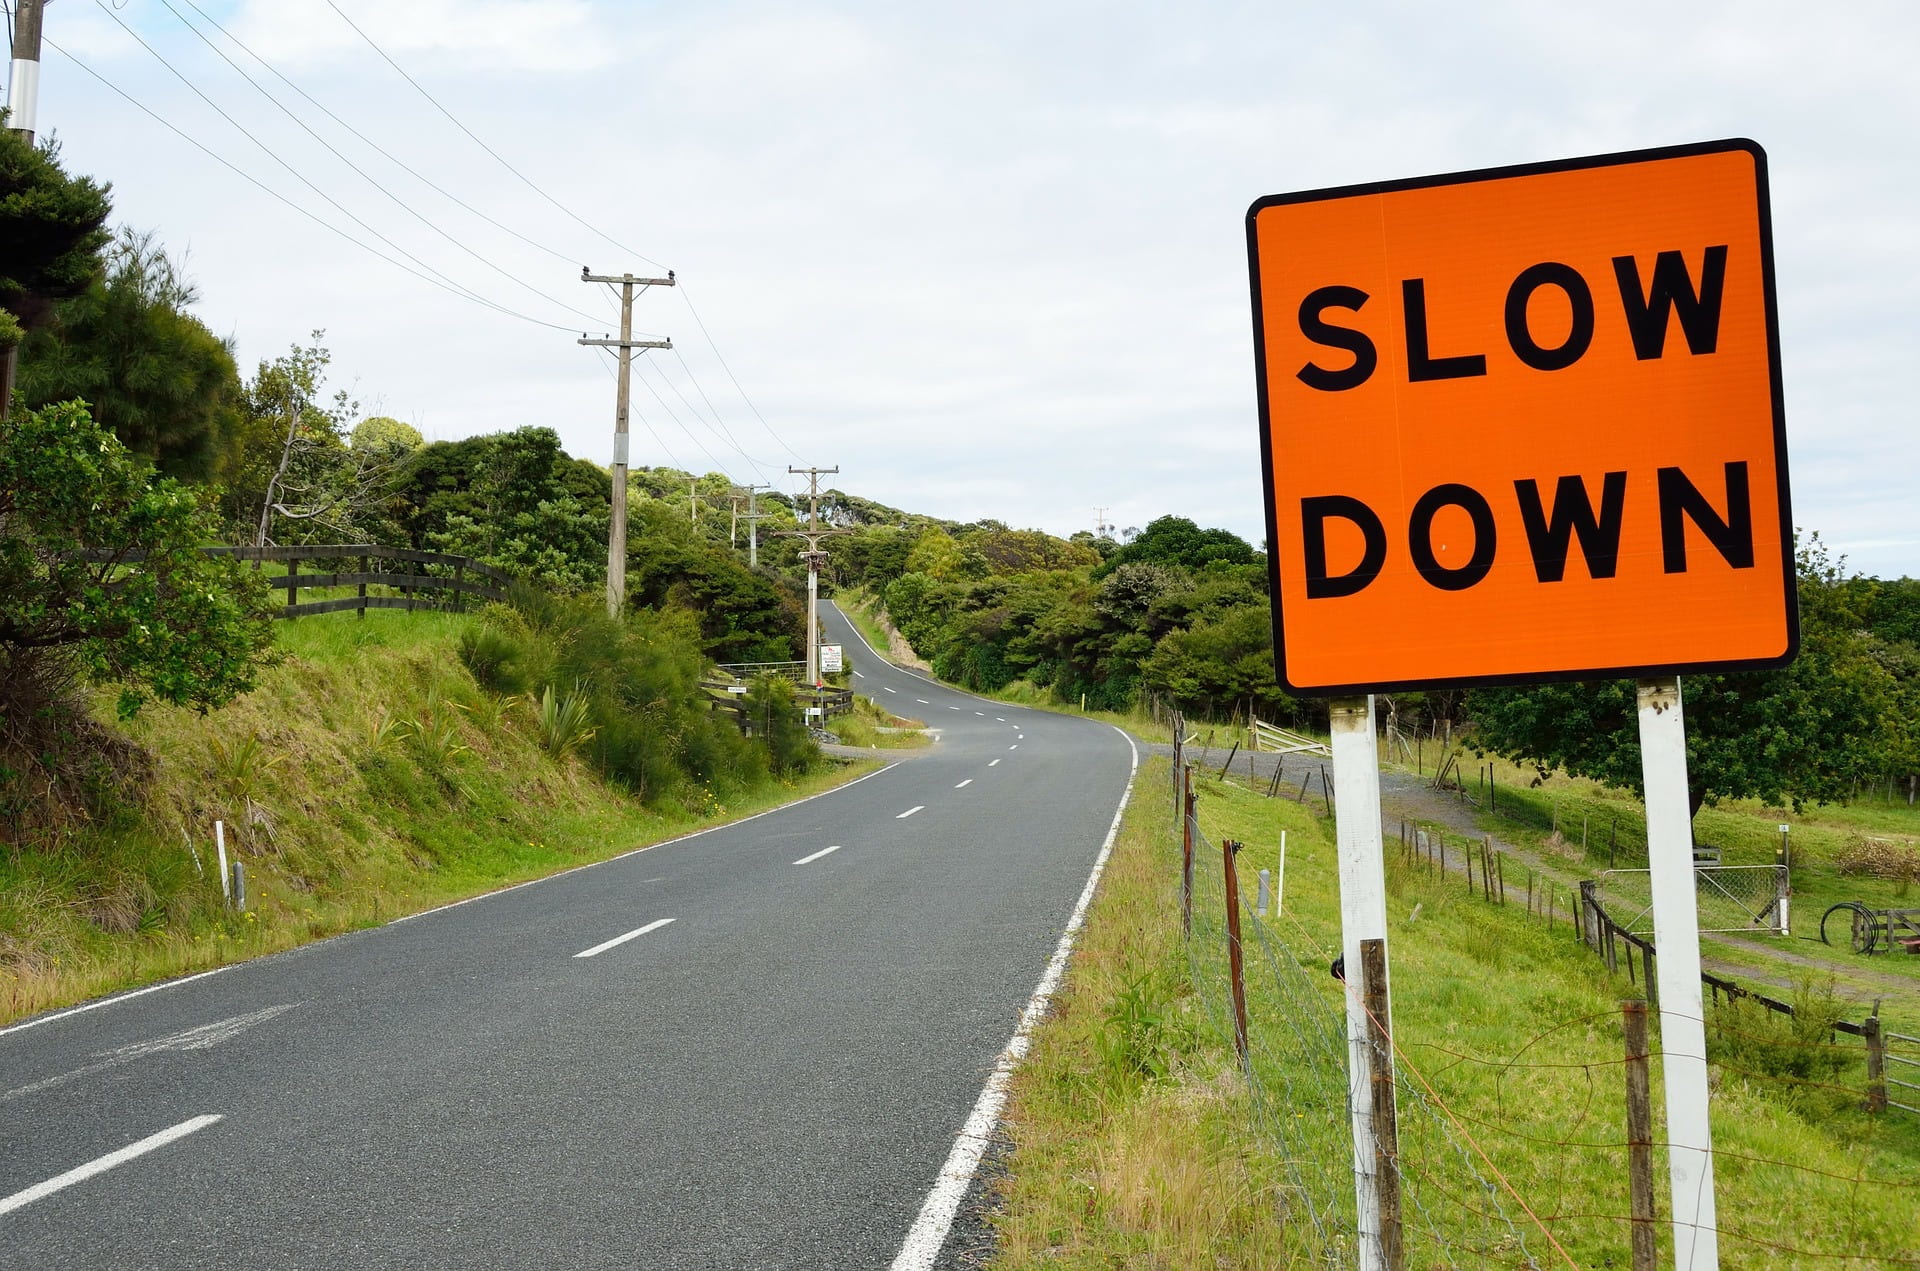 Image of a winding rural road with an orange and black road sign with the words “slow down”.